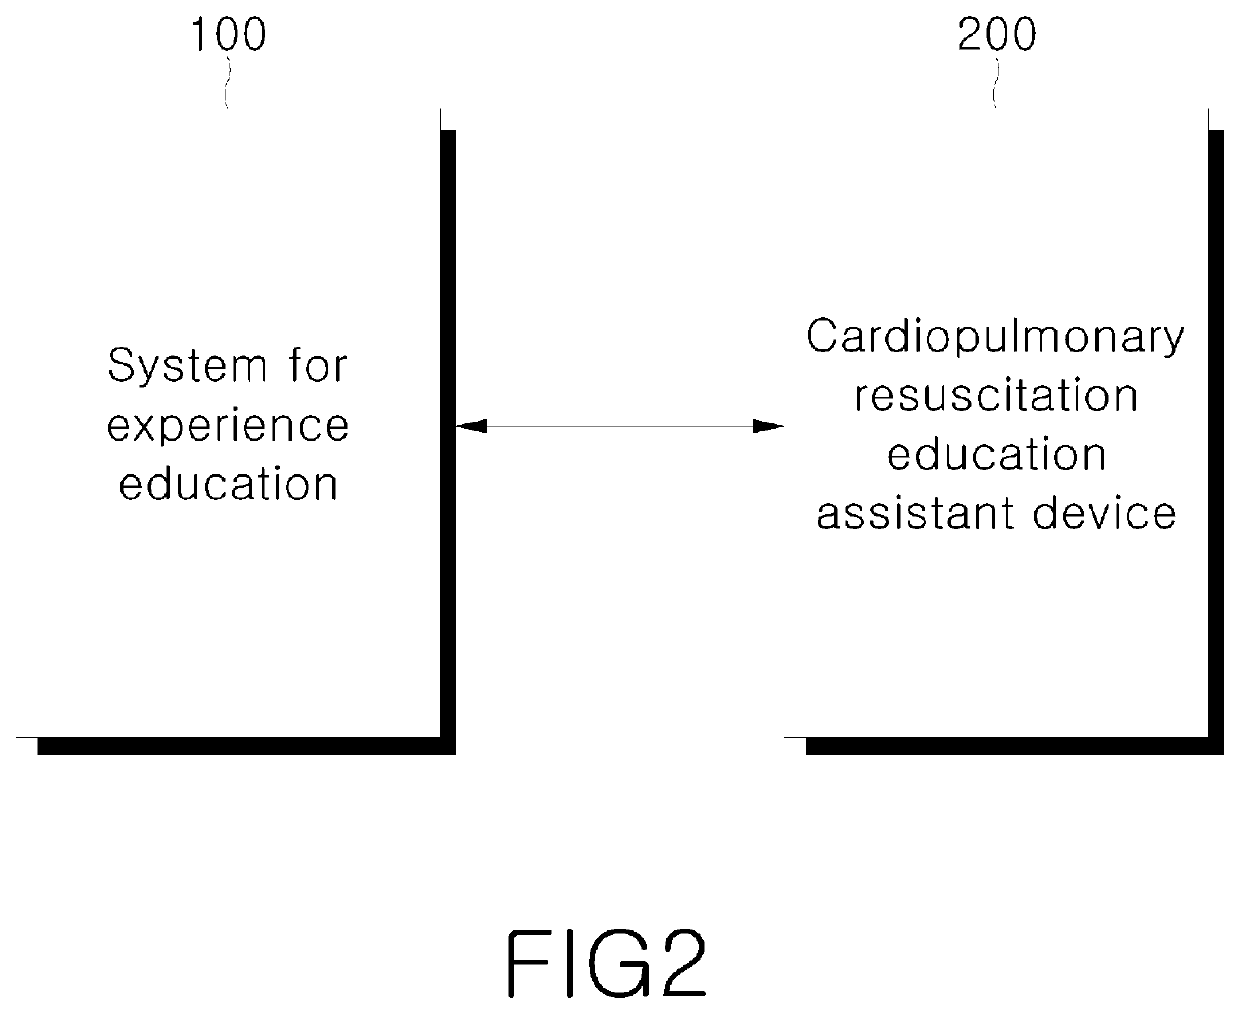 System for experience educating vital signs and cardiopulmonary